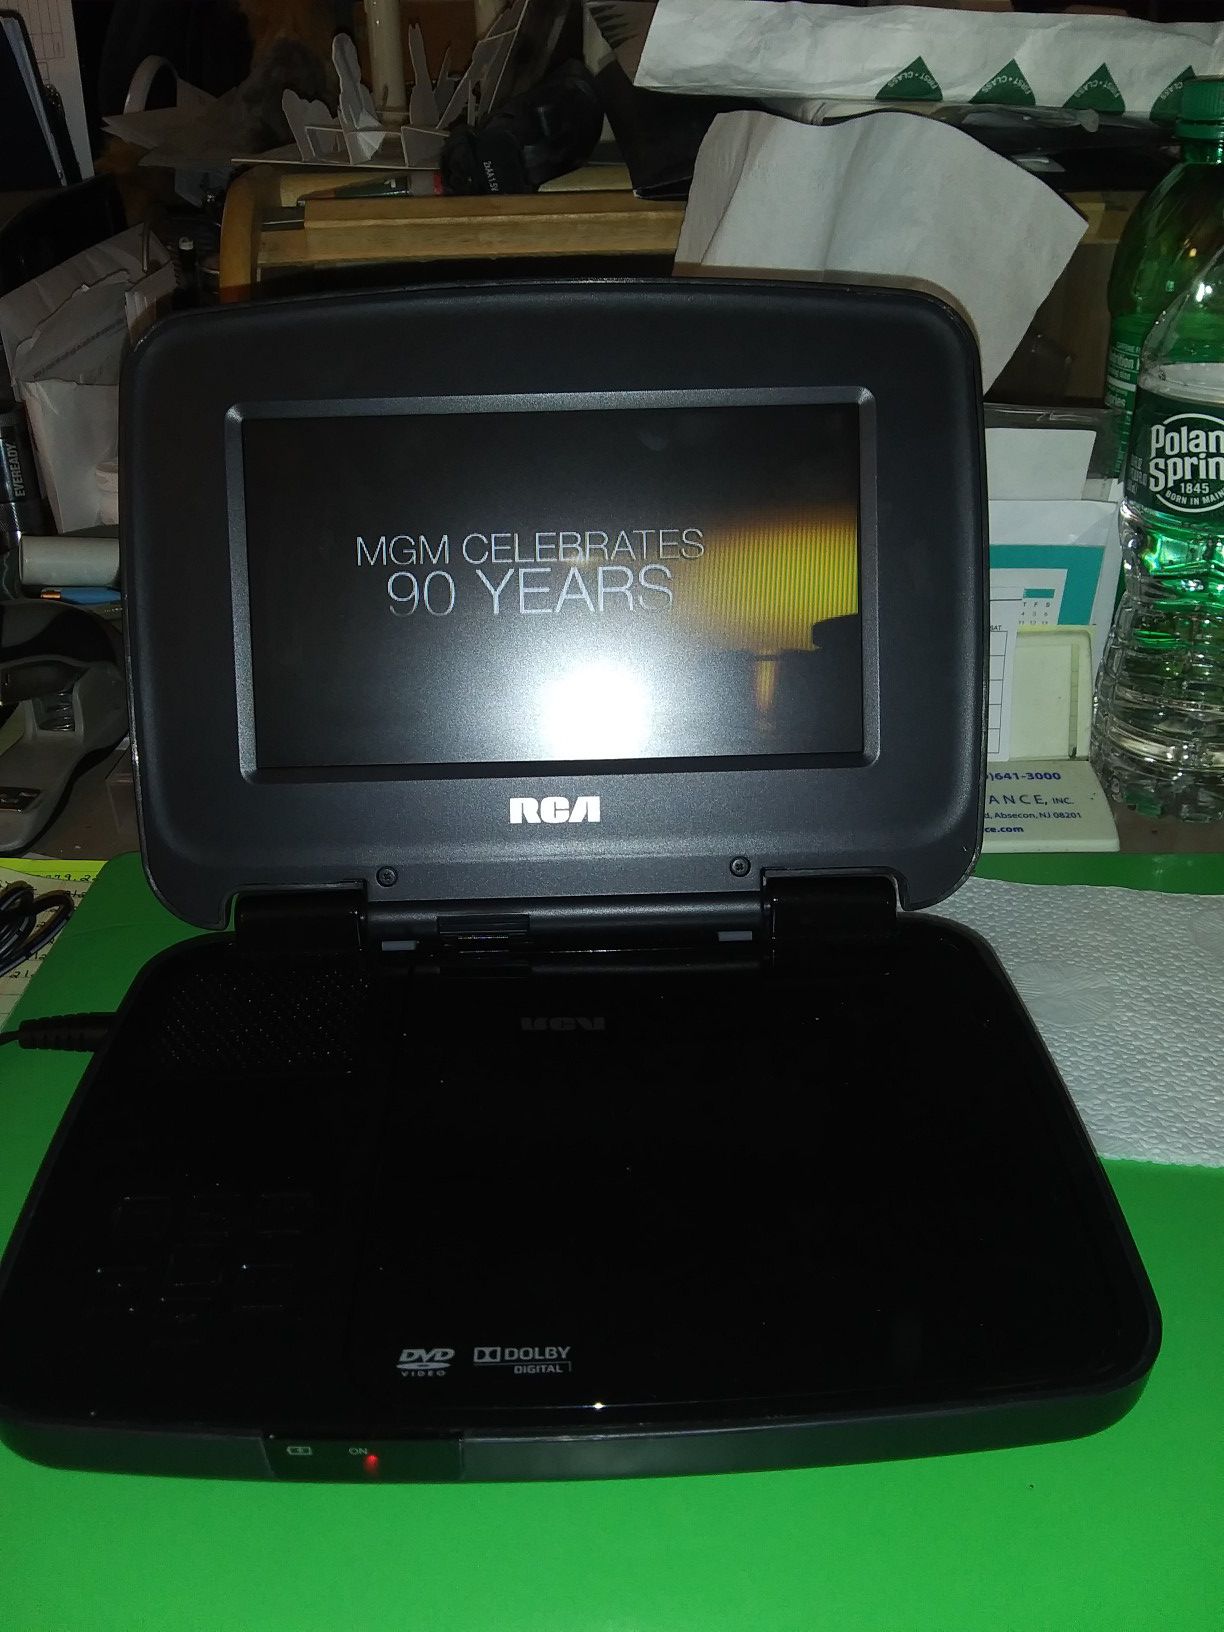 Rca portable DVD and Blue ray player